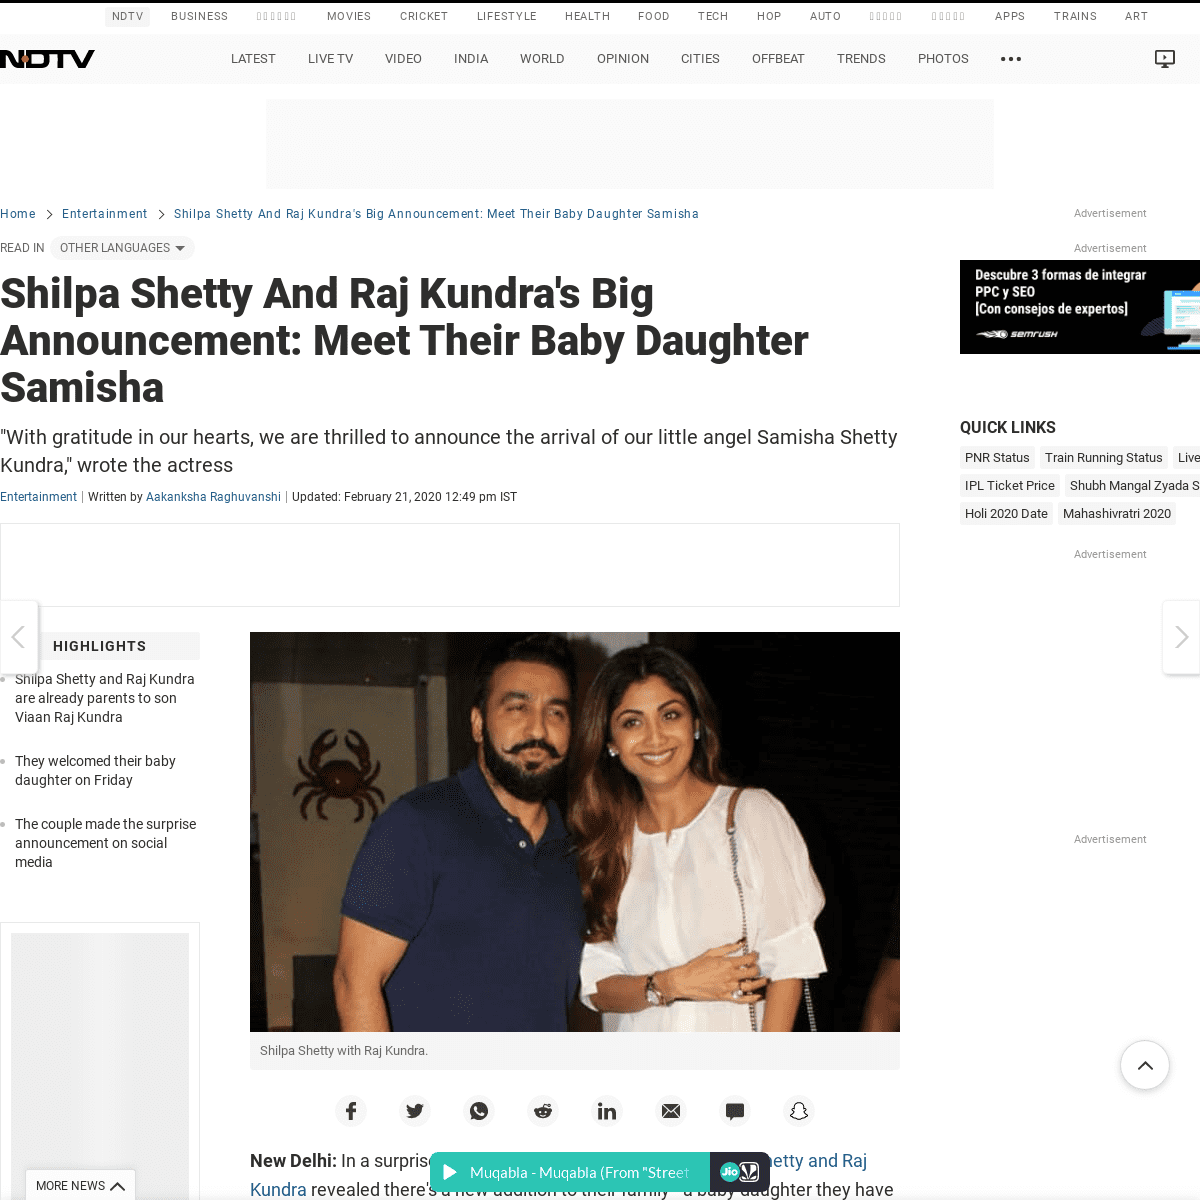 A complete backup of www.ndtv.com/entertainment/shilpa-shetty-and-raj-kundras-big-announcement-meet-their-baby-daughter-samisha-